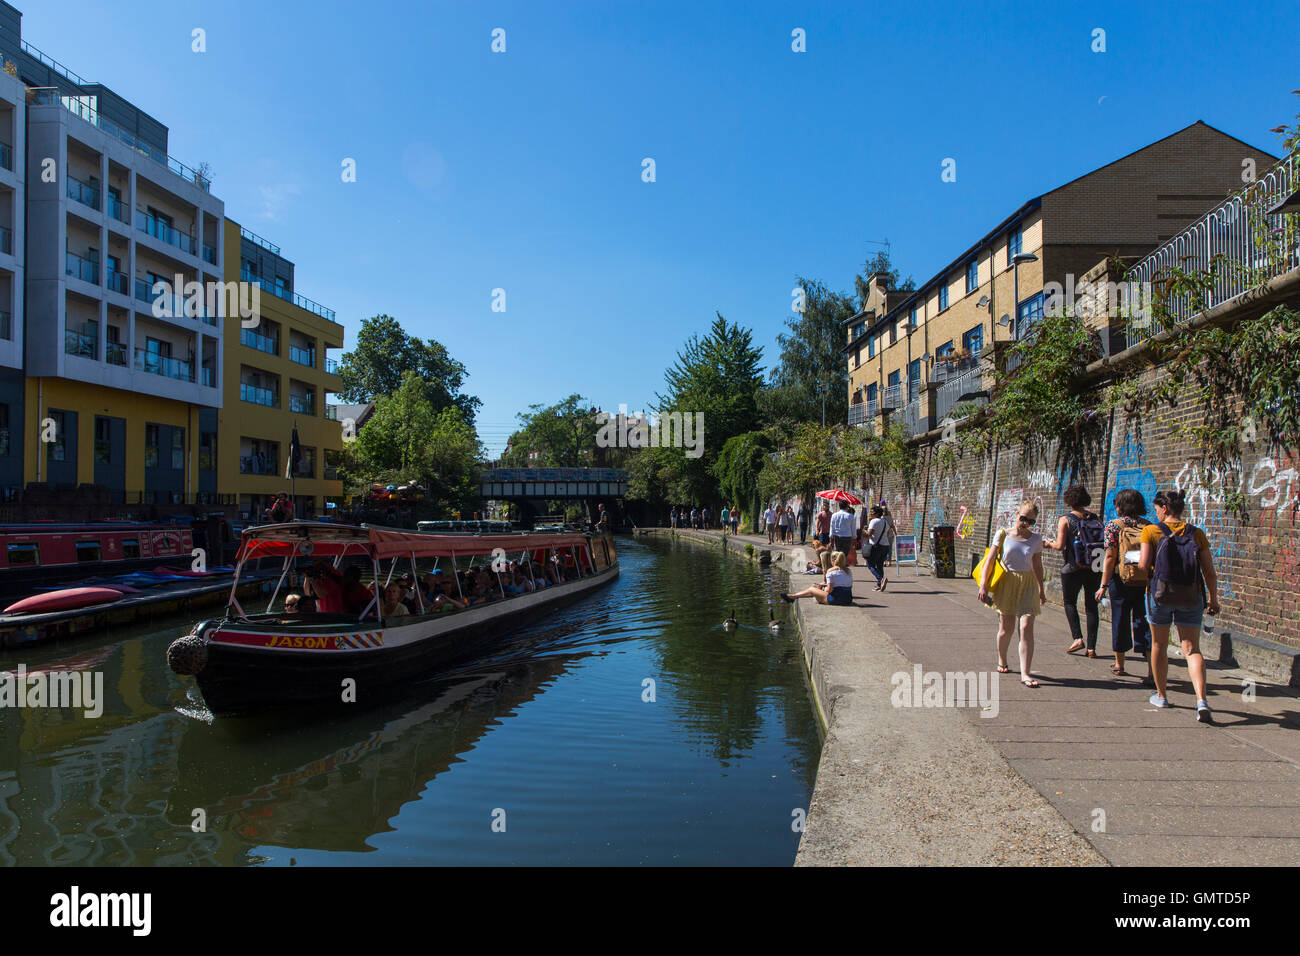 London, England. 26th August 2016. Regent's Canal. Stock Photo